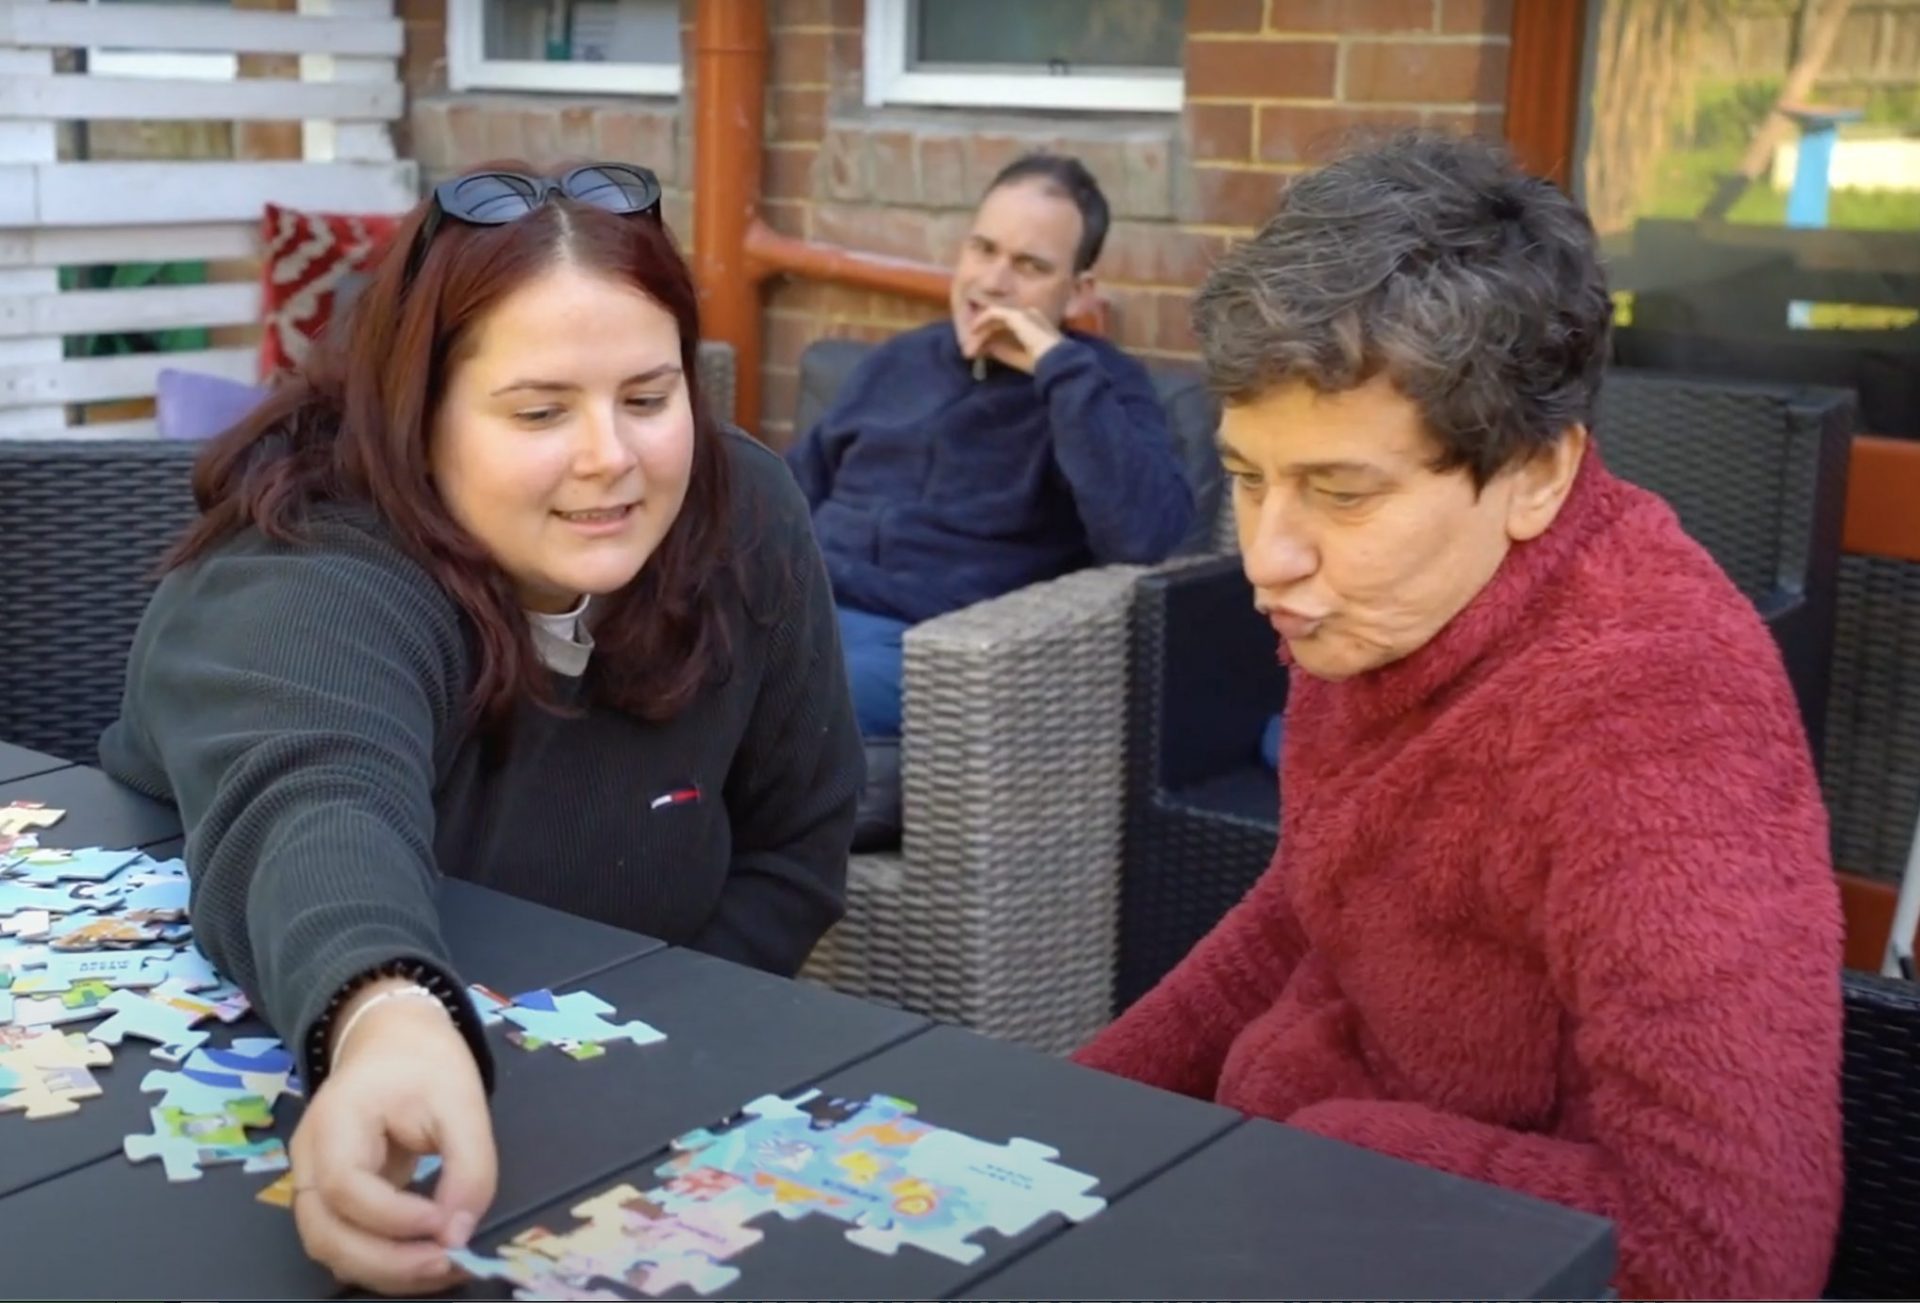 Client and support worker solving a puzzle